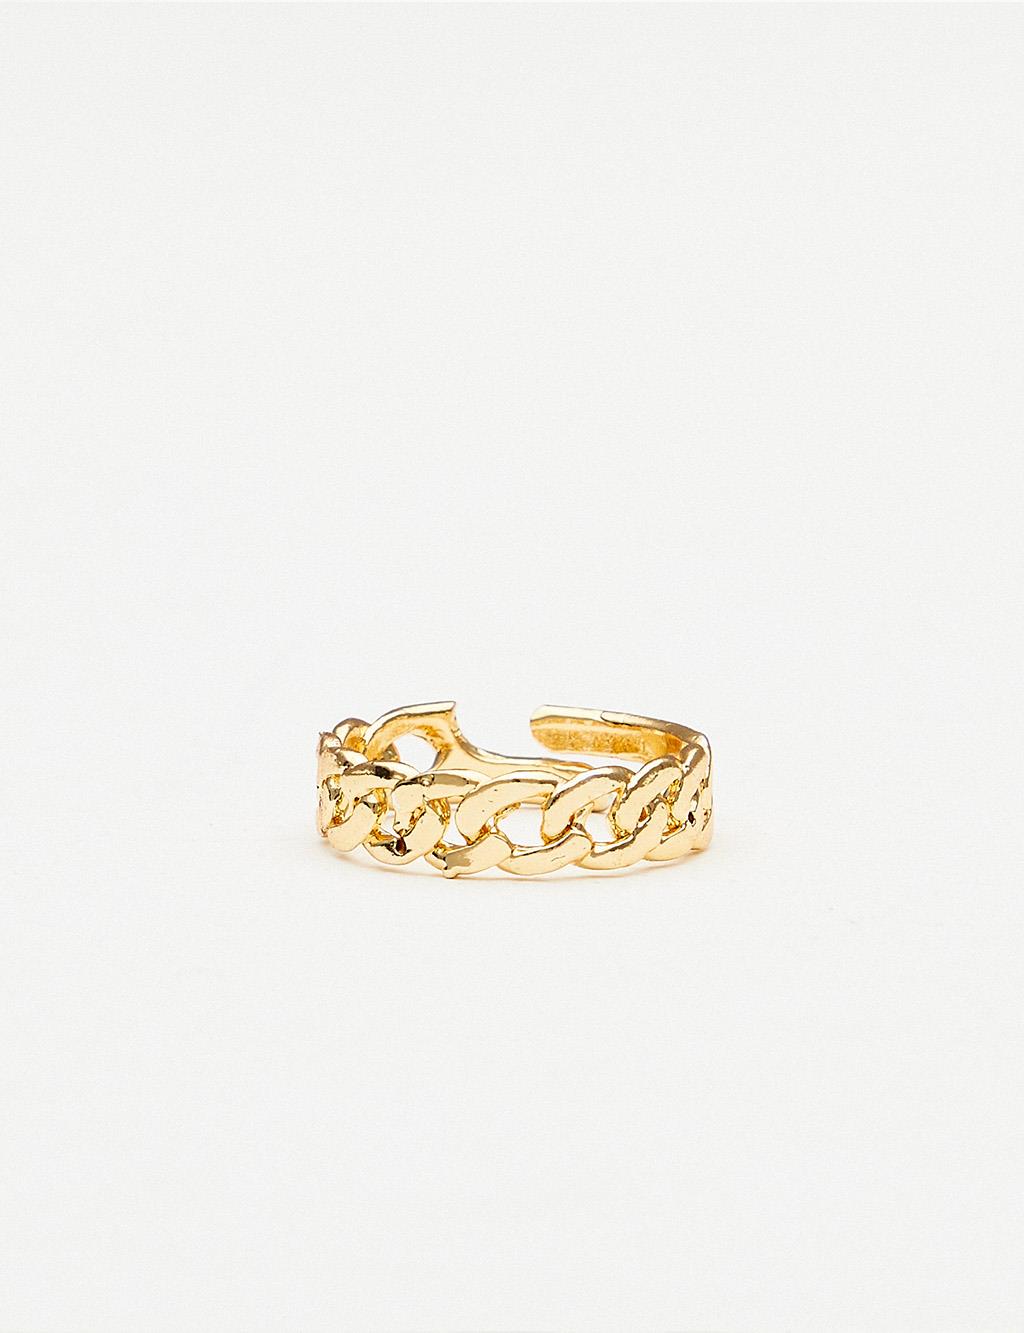 Adjustable Knit Chain Ring Gold Color